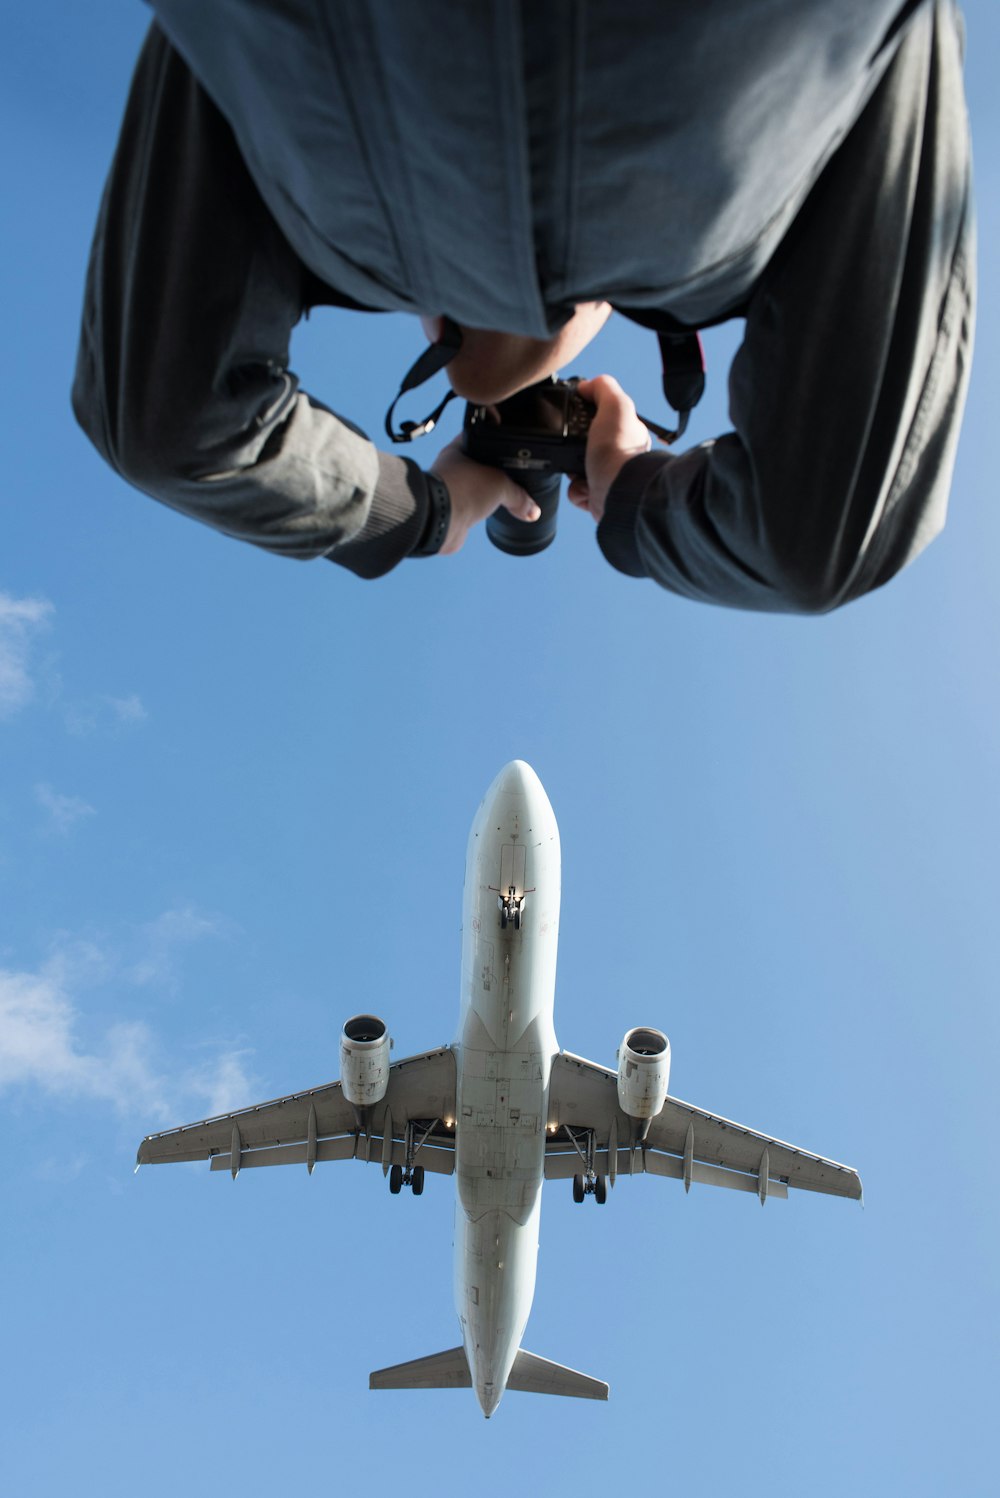 low angle photography of man taking photo of plane during daytime